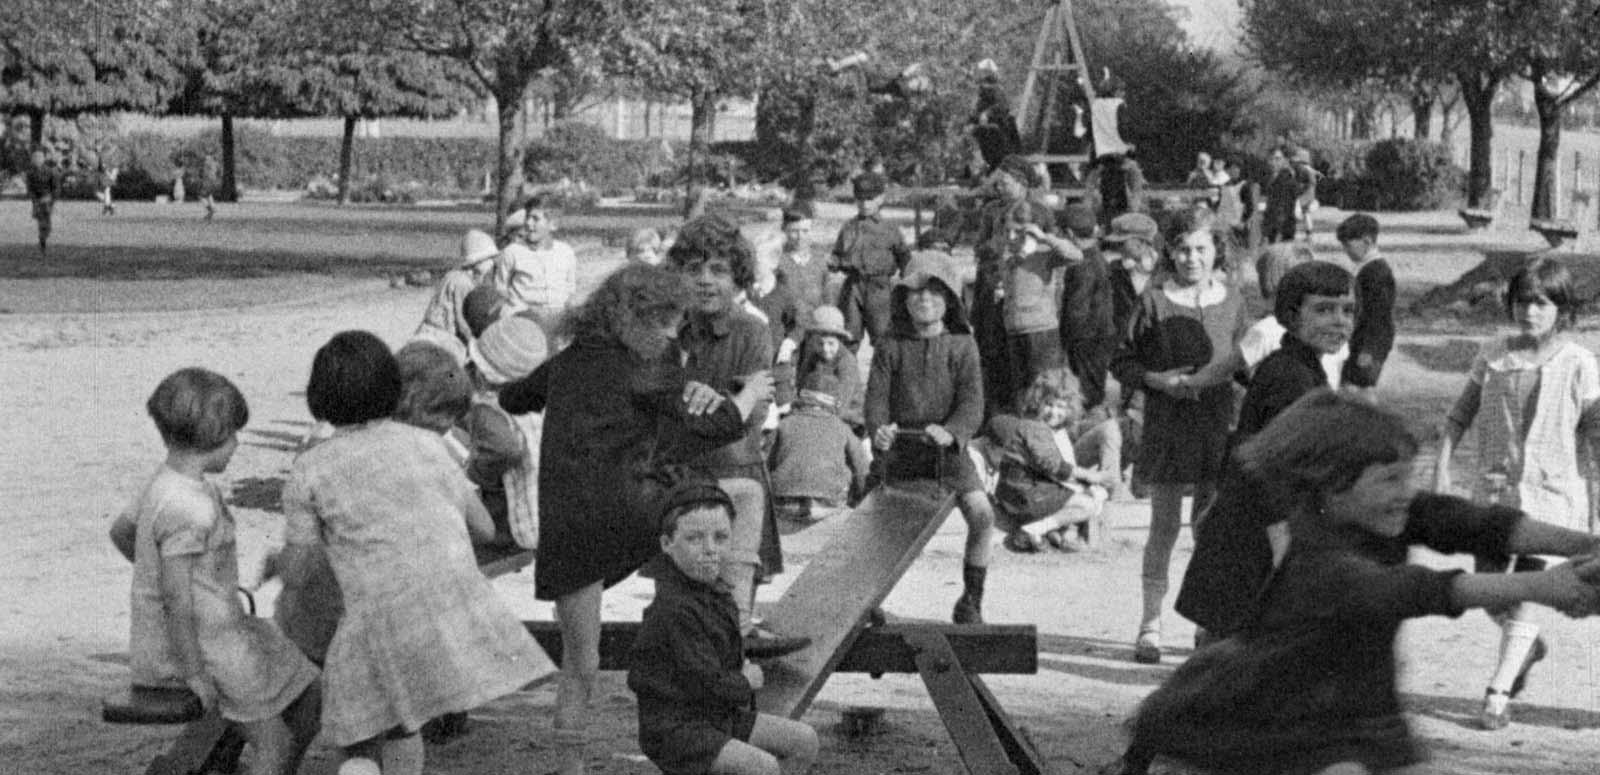 A group of schoolchildren playing in an Adelaide park in 1925